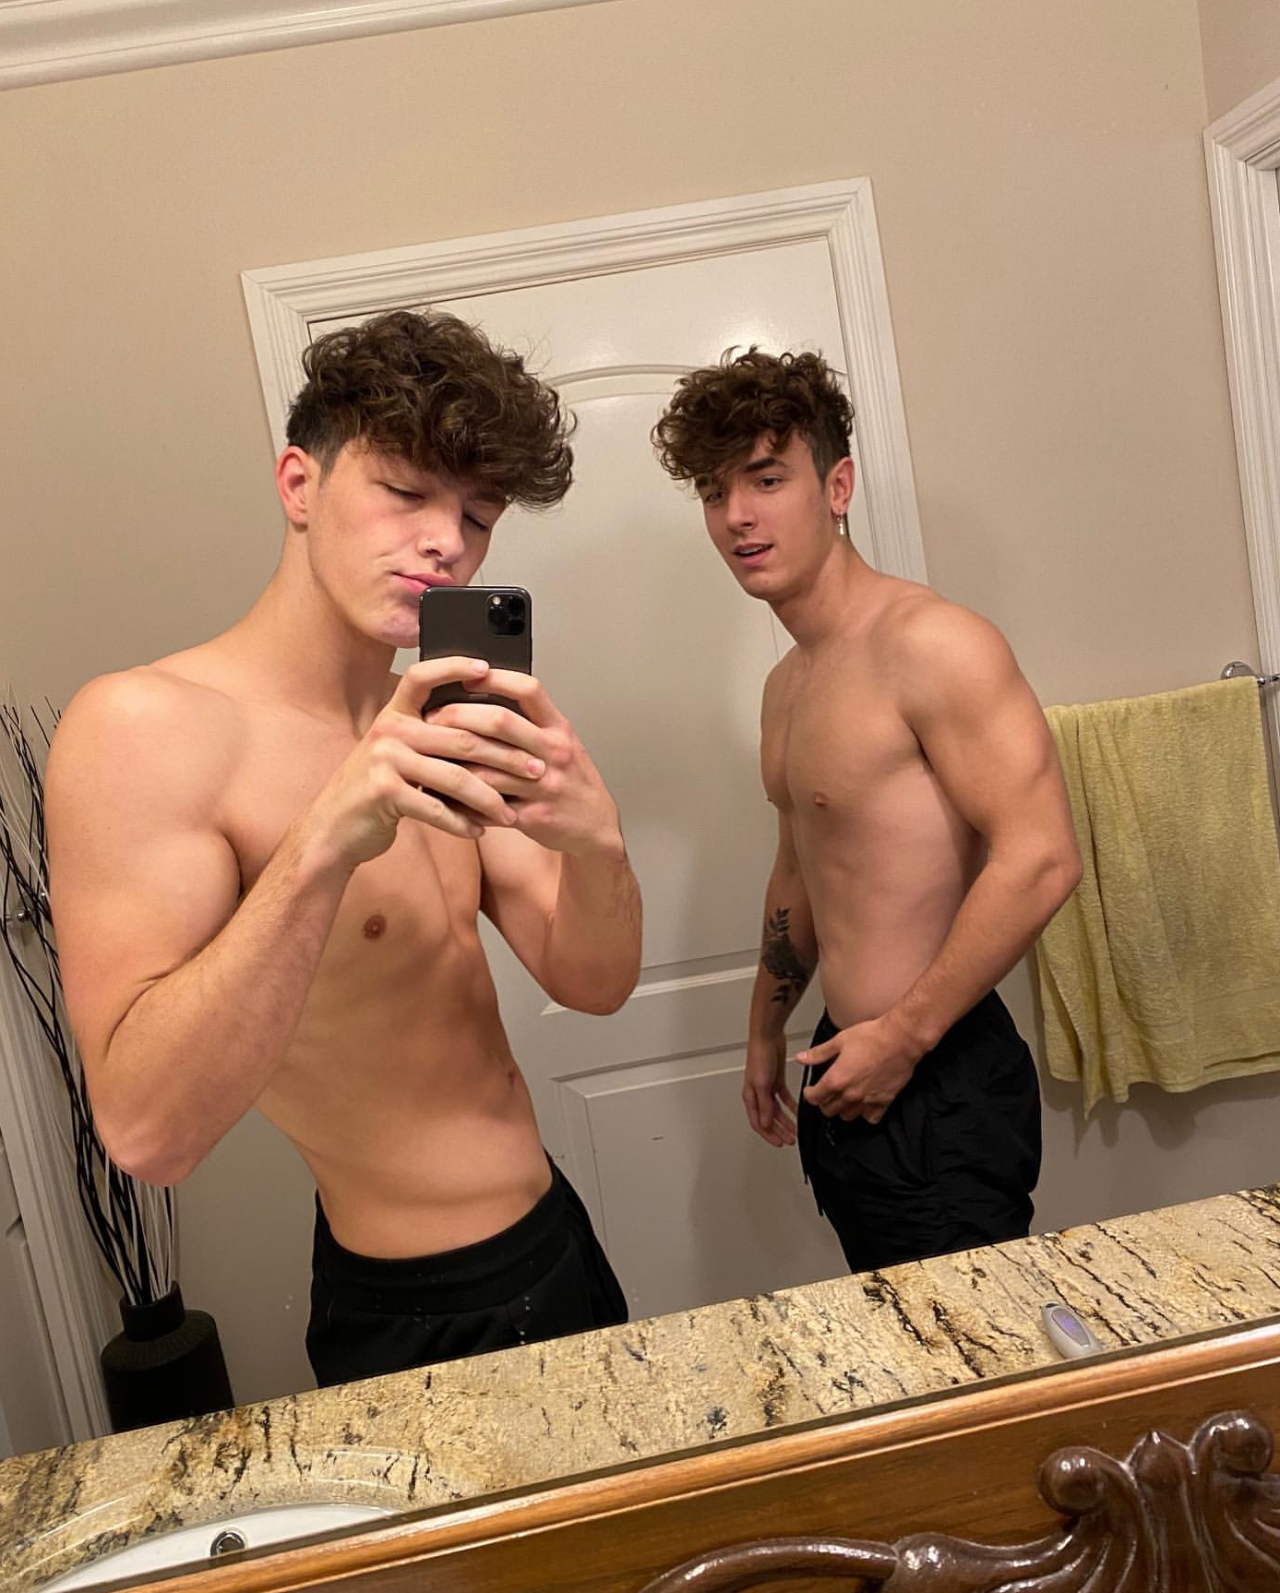 Lord, tiktok star bryce hall and the sway house are facing backlash for hos...